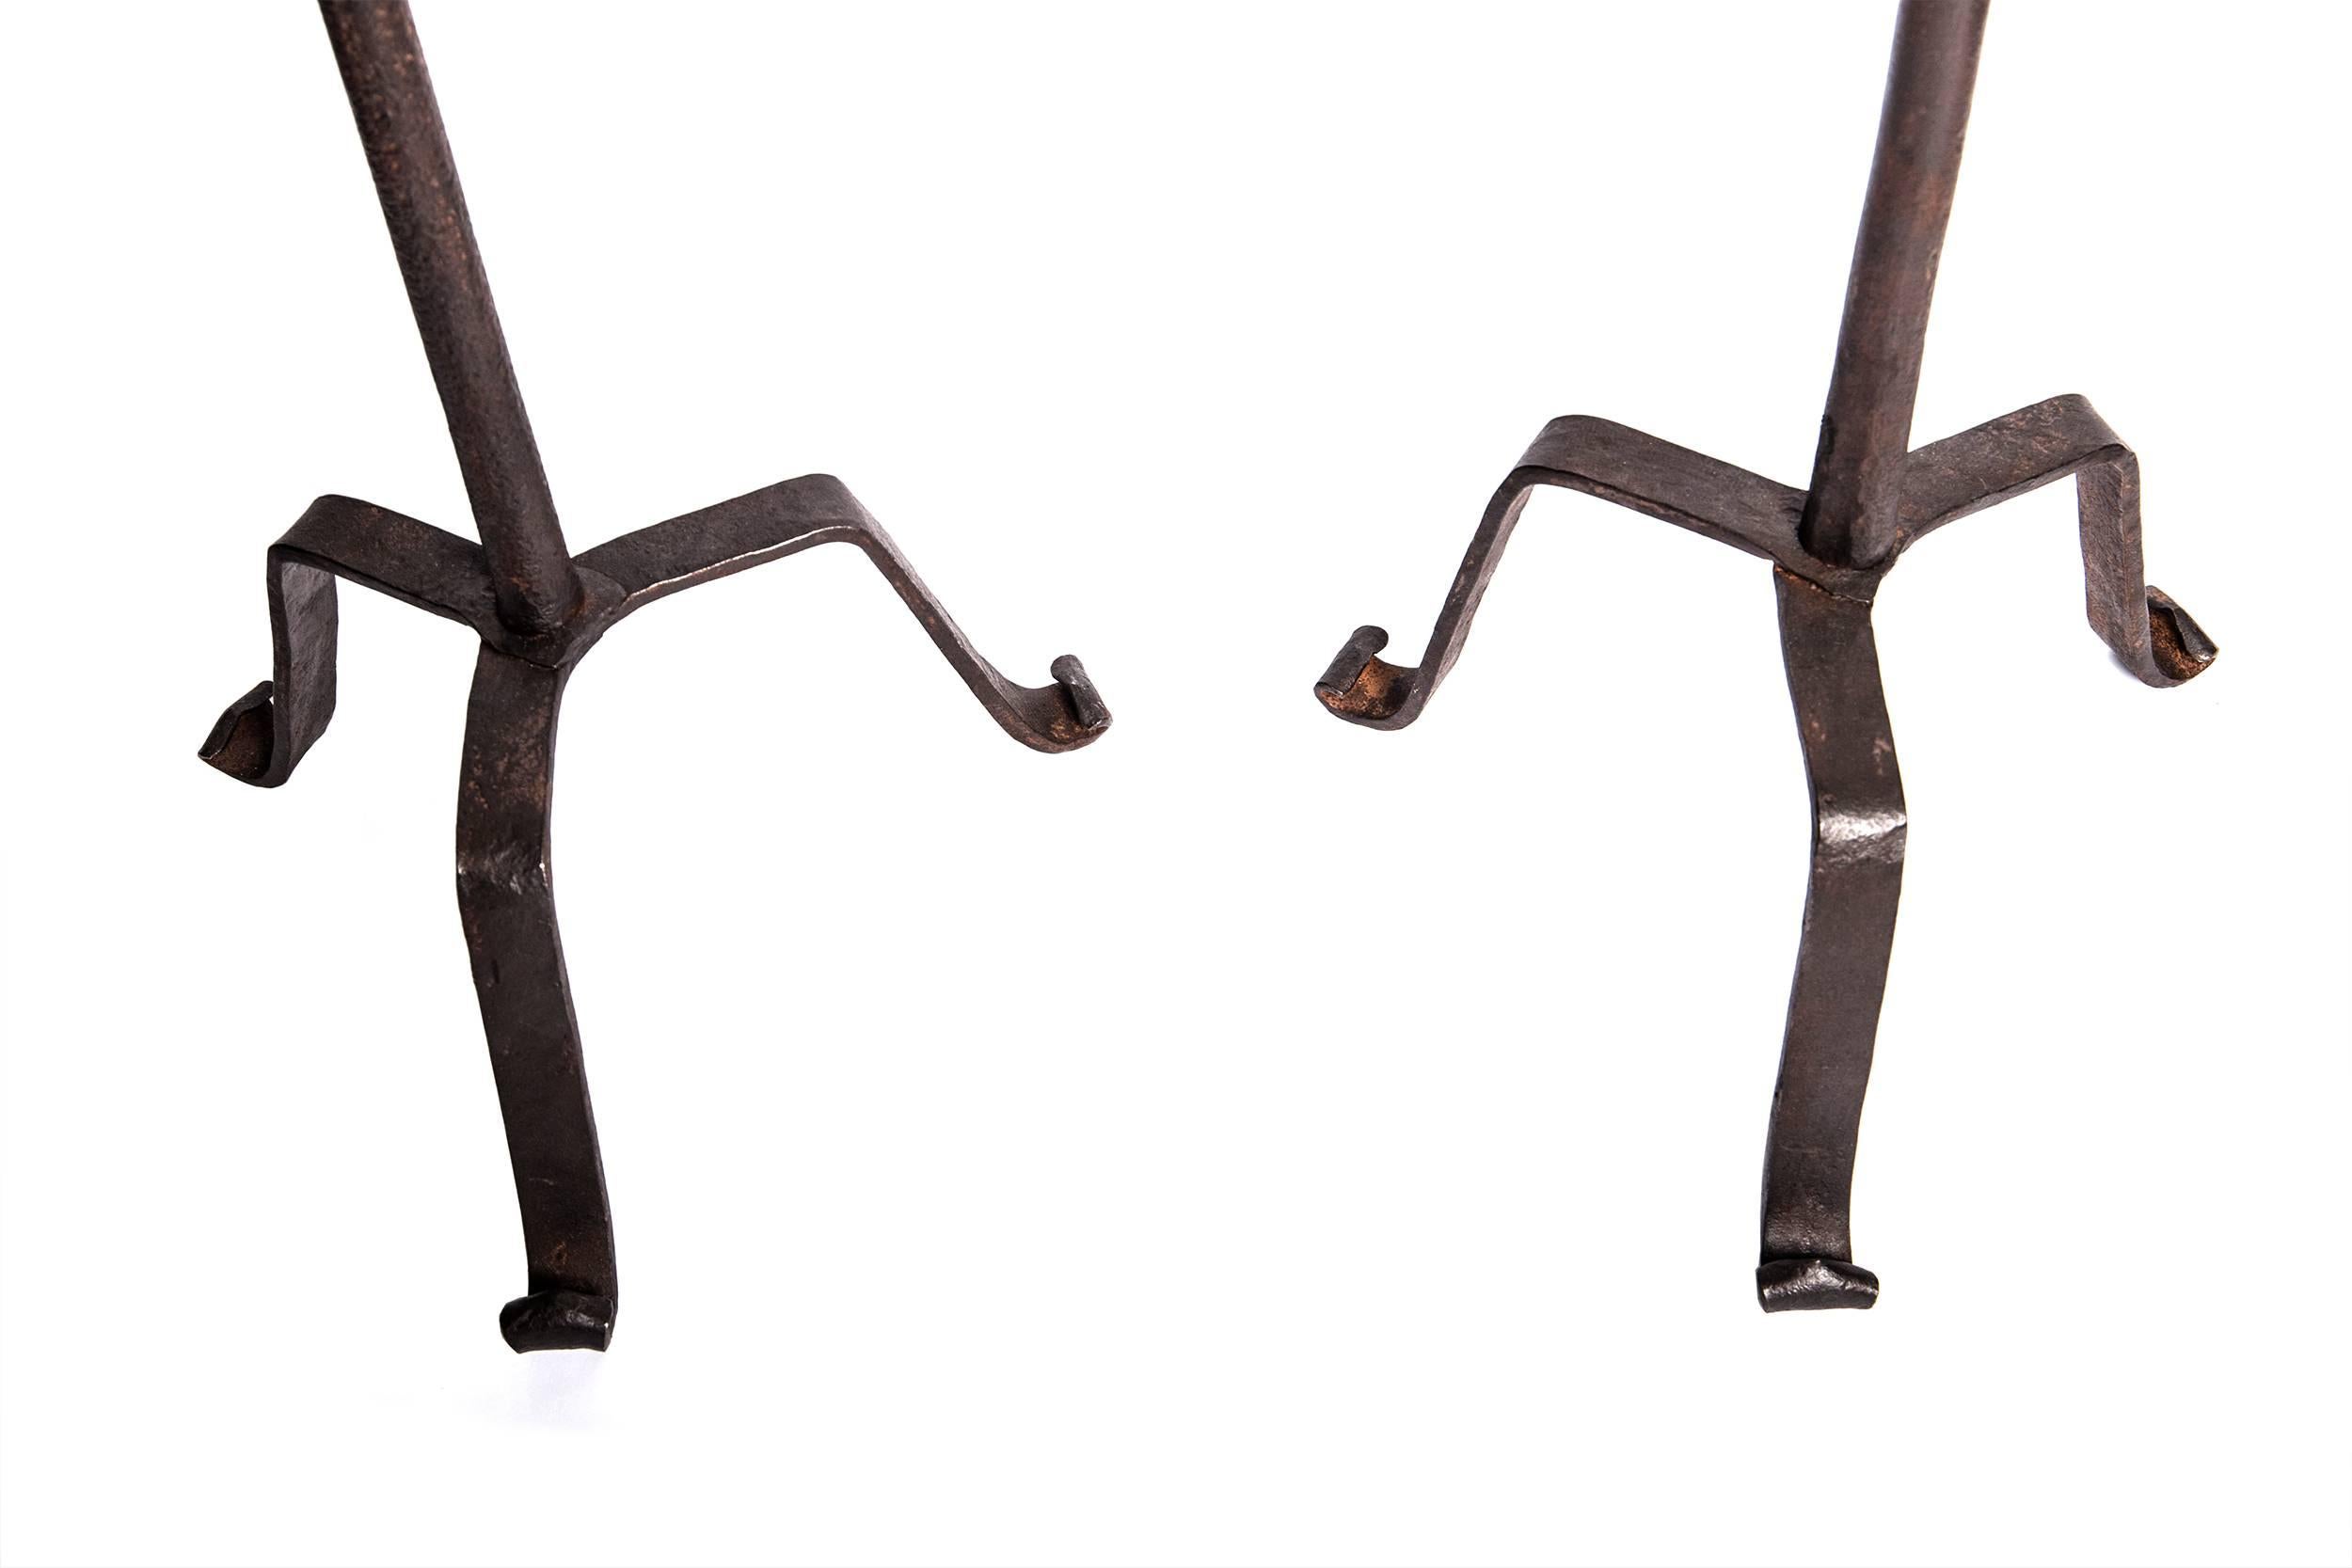 Baroque Pair of Wrought Iron Floor Standing Prickets from Umbria, 16th Century